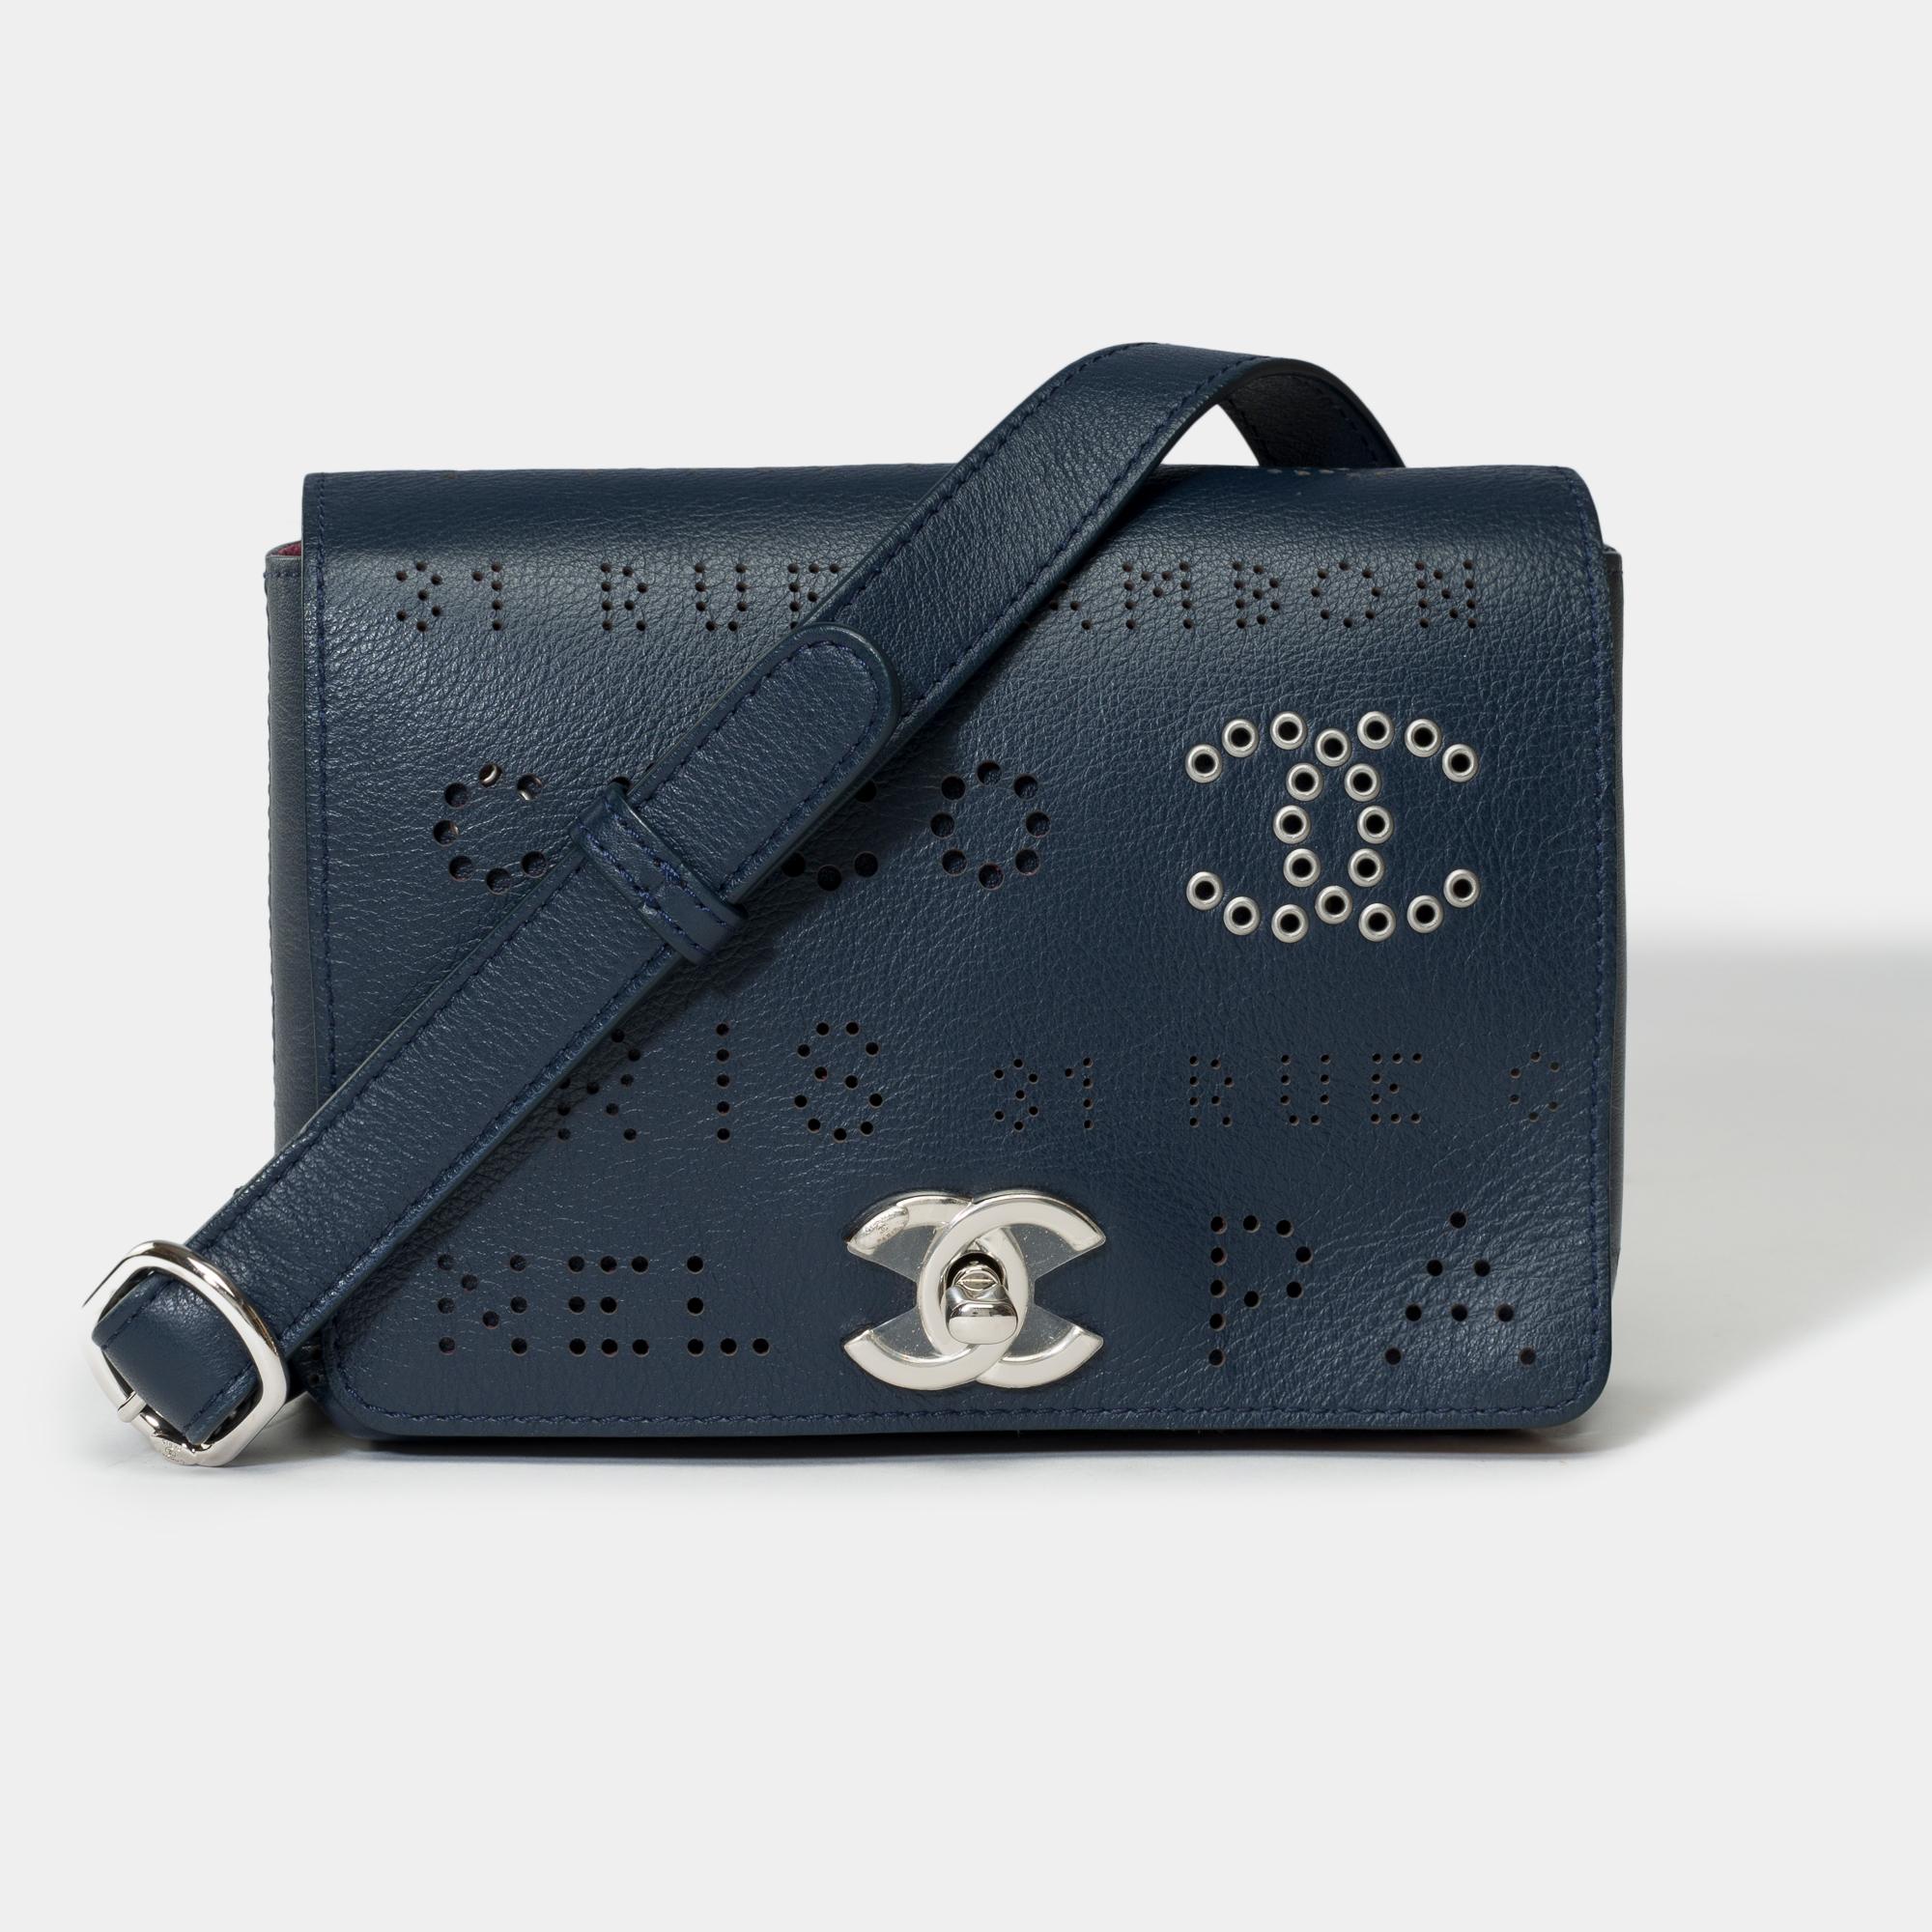 Gorgeous​ ​Chanel​ ​Classic​ ​shoulder​ ​flap​ ​bag​ ​with​ ​perforated​ ​logo​ ​in​ ​navy​ ​blue​ ​leather,​ ​silver​ ​metal​ ​trim,​ ​an​ ​adjustable​ ​chain​ ​handle​ ​in​ ​silver​ ​metal​ ​and​ ​navy​ ​leather​ ​for​ ​a​ ​hand​ ​or​ ​shoulder​